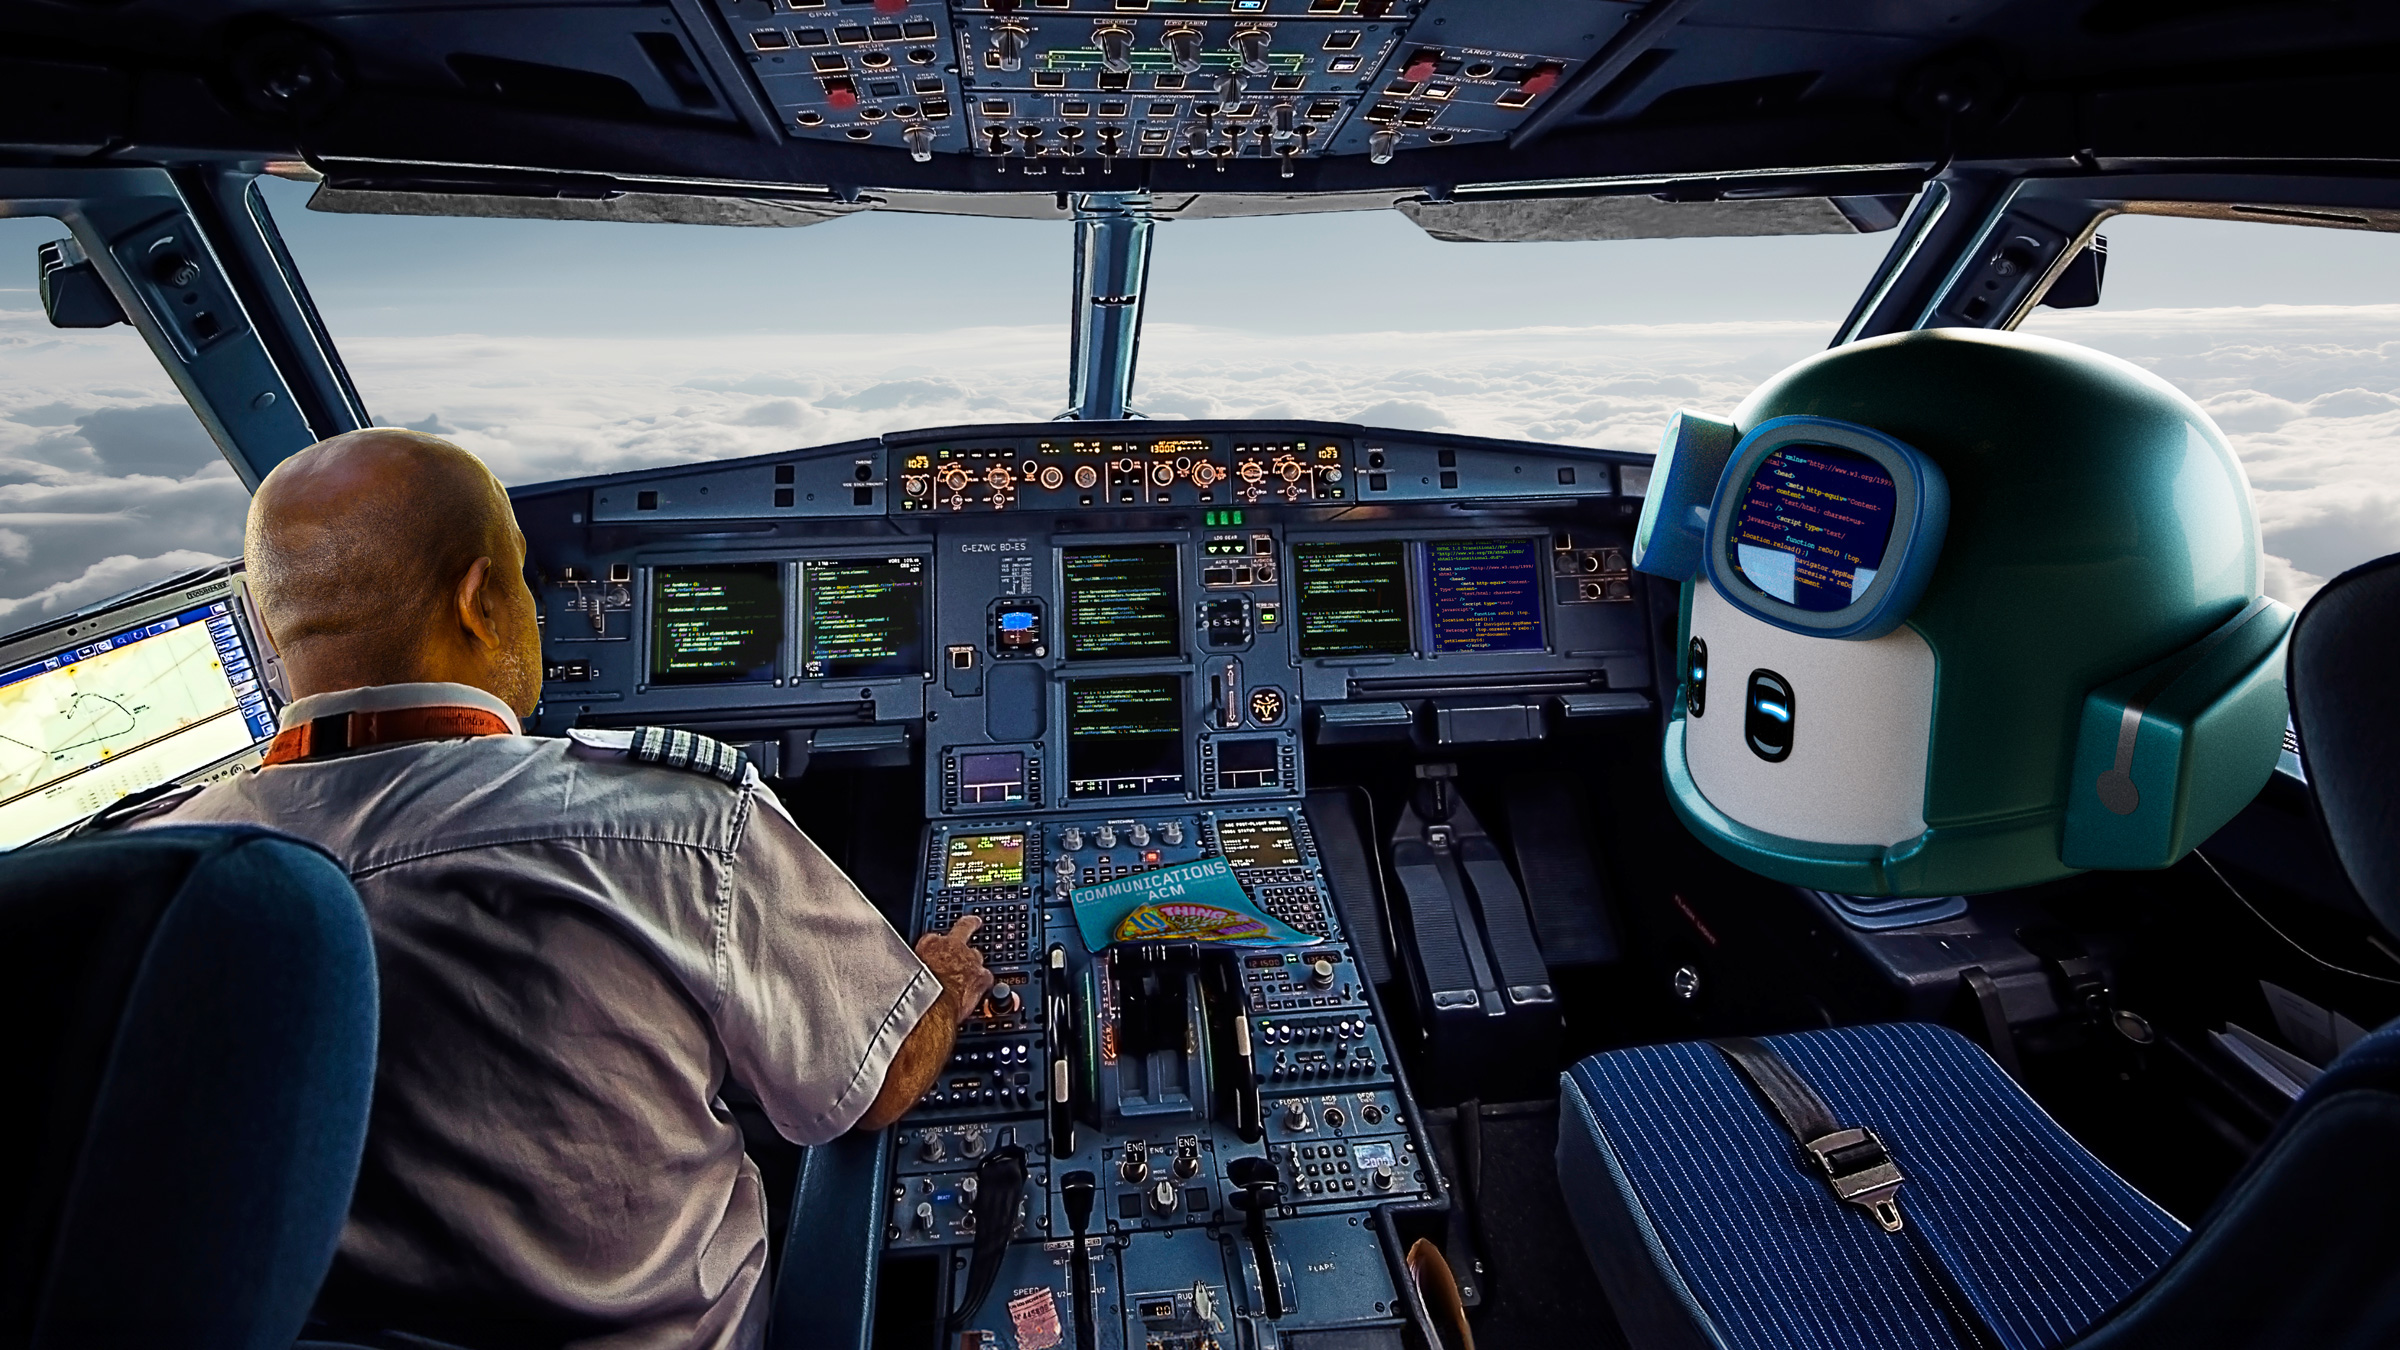 robotic chatbot in copilot seat of aircraft cockpit